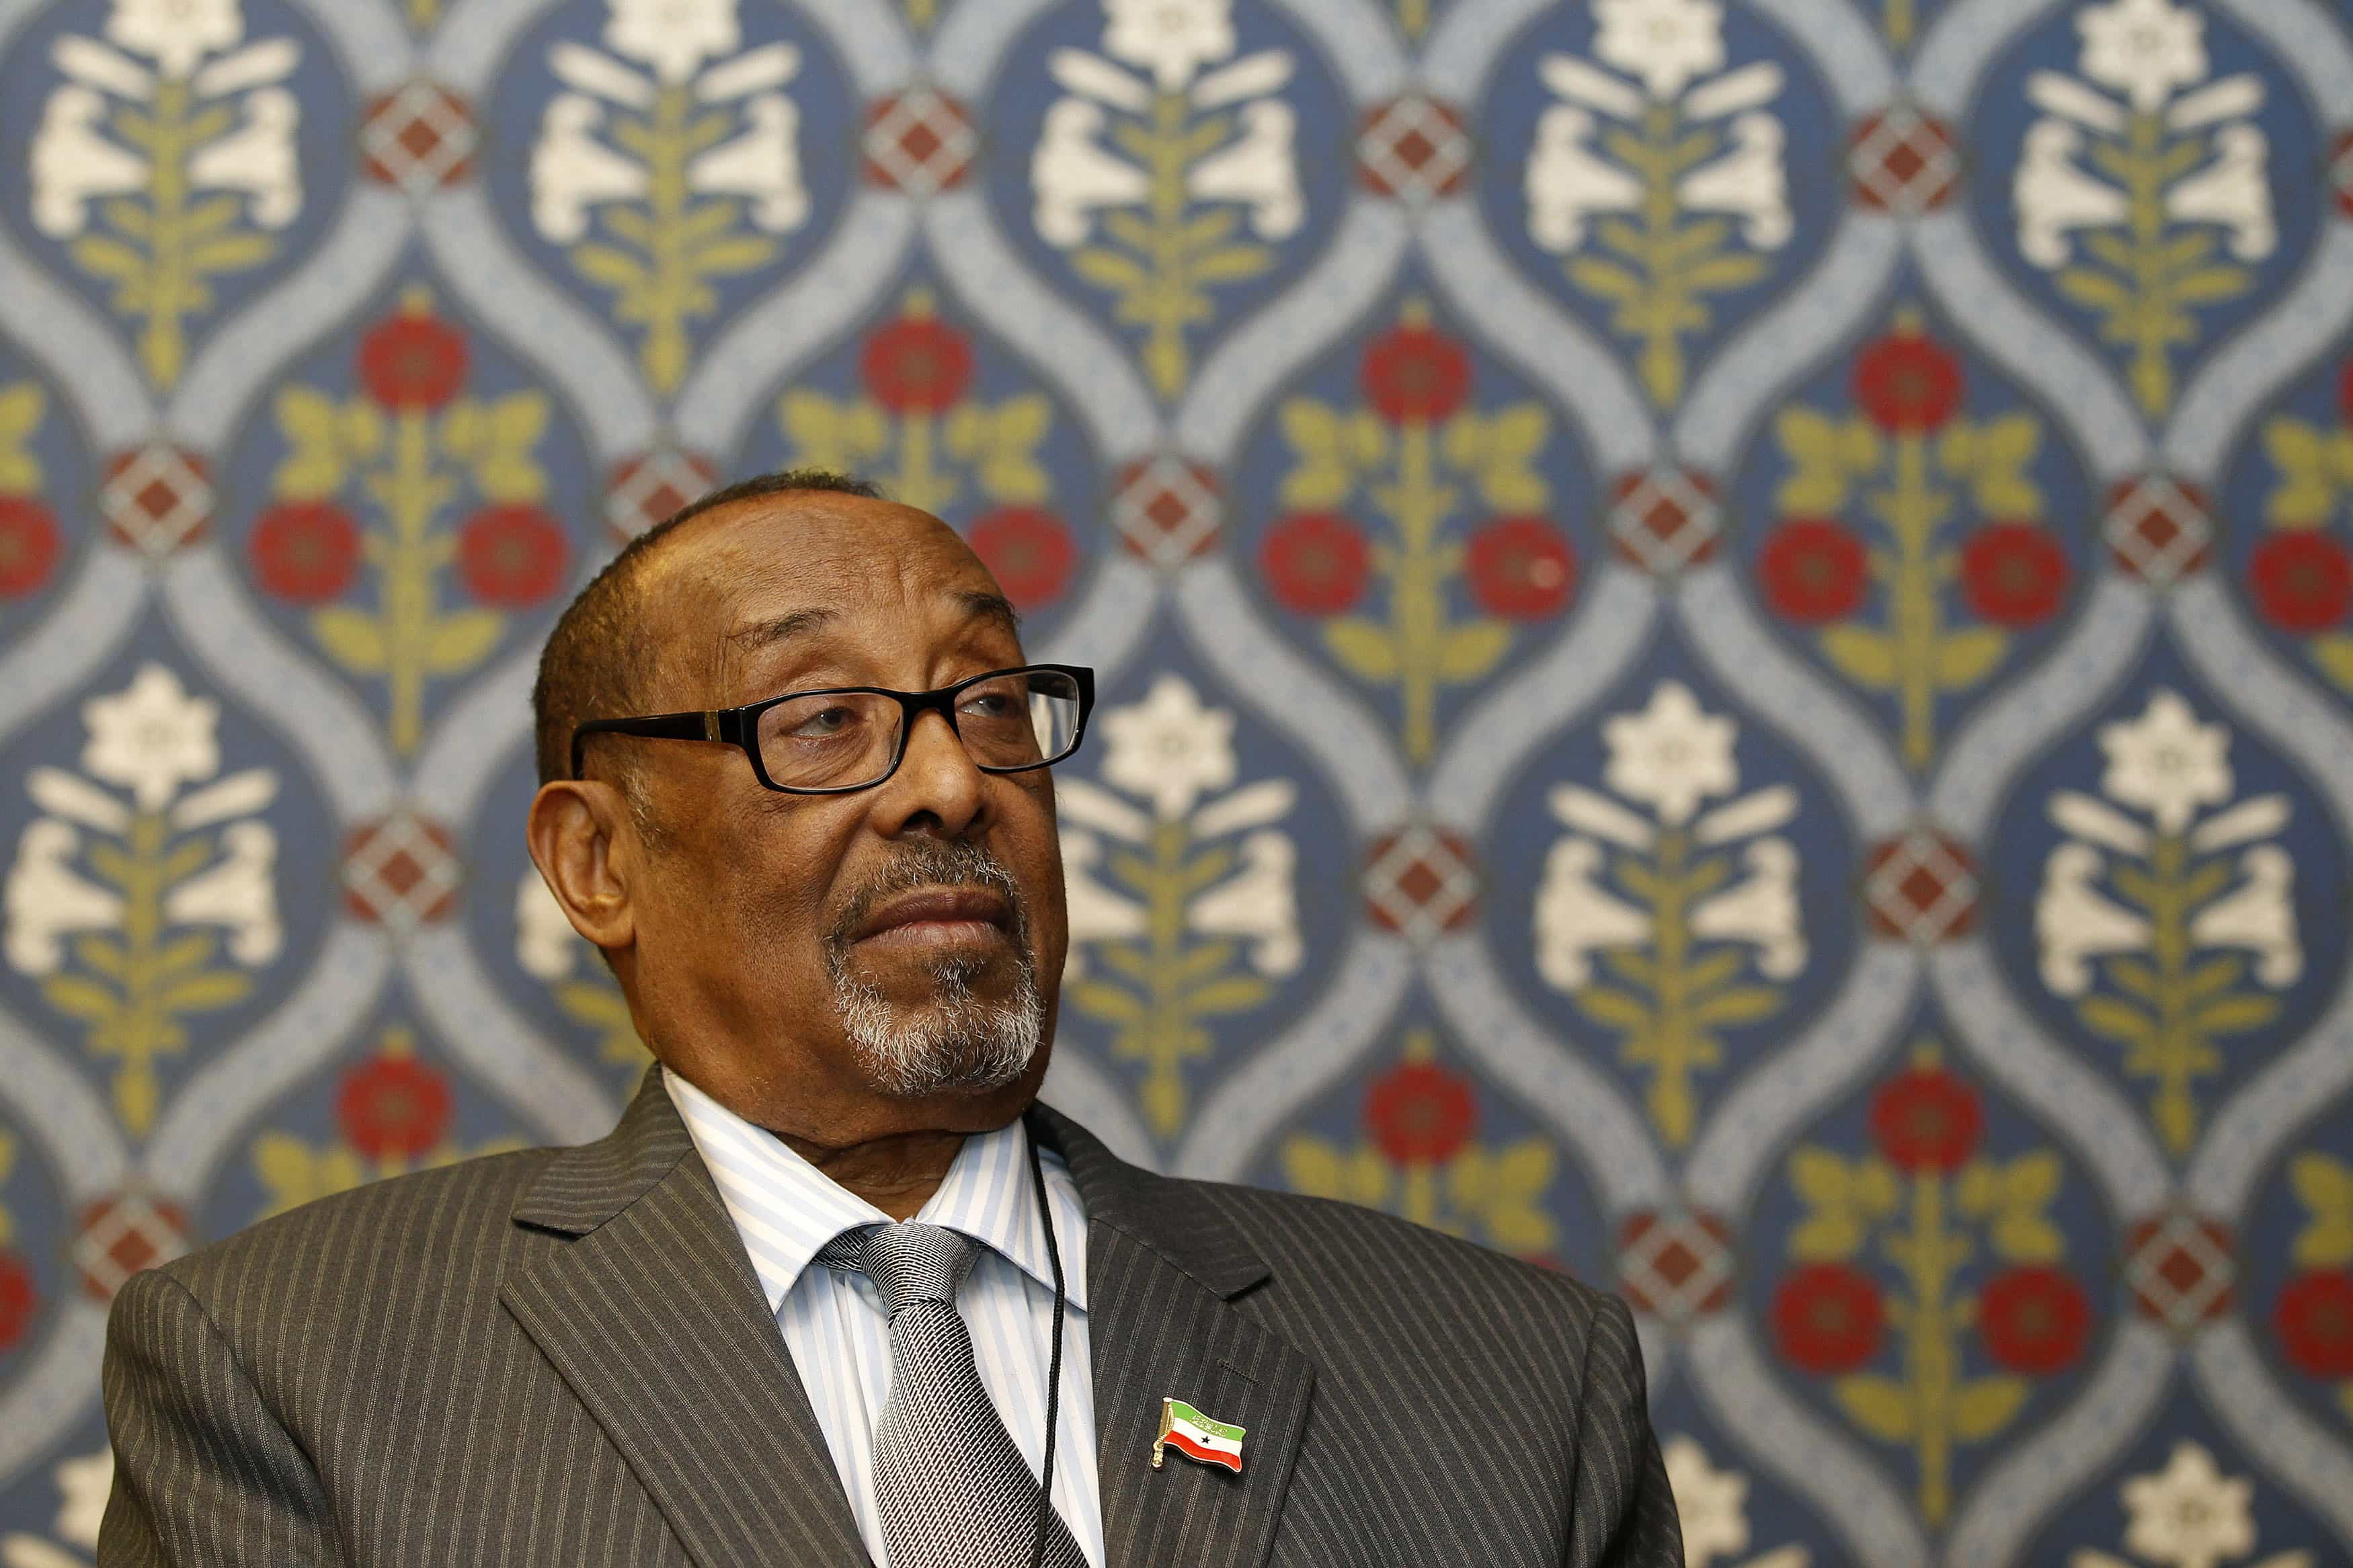 Somaliland President Ahmed Mohamed Mohamoud (Silanyo) attends a meeting at the House of Commons in London, 22 February 2012. , REUTERS/Stefan Wermuth